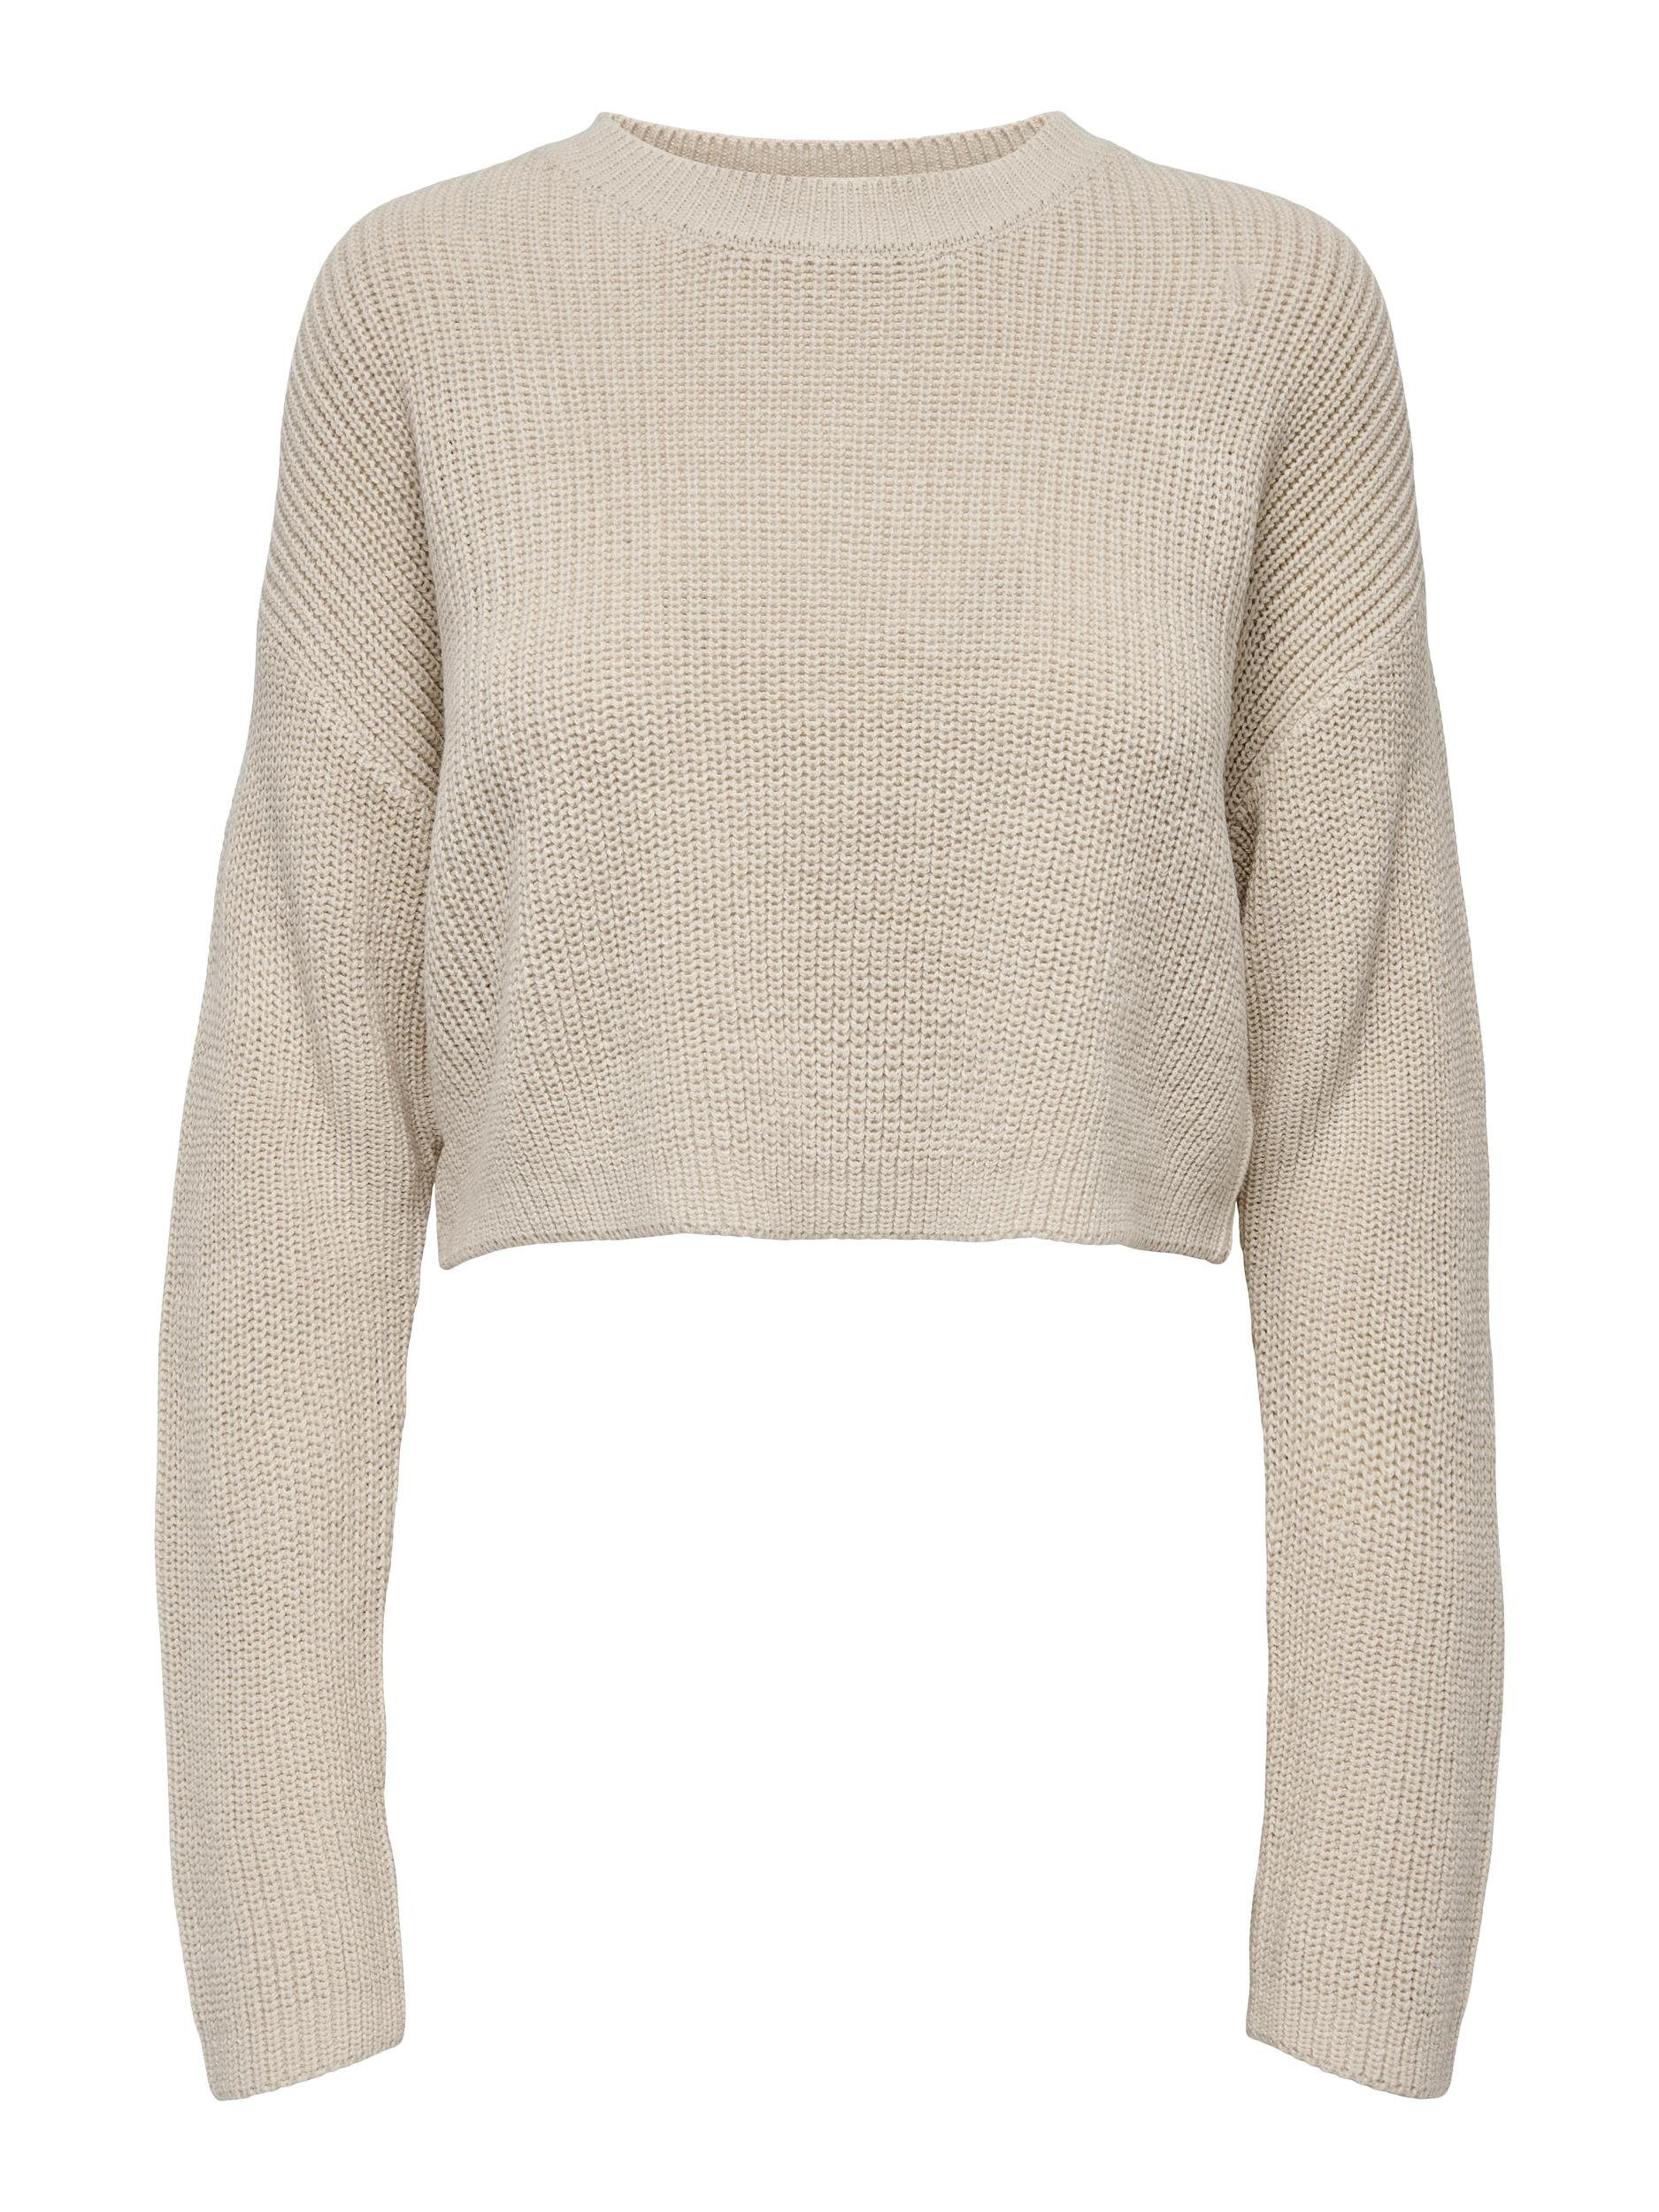 Stone NOOS ONLMALAVI CROPPED L/S KNT ONLY Pumice PULLOVER Strickpullover